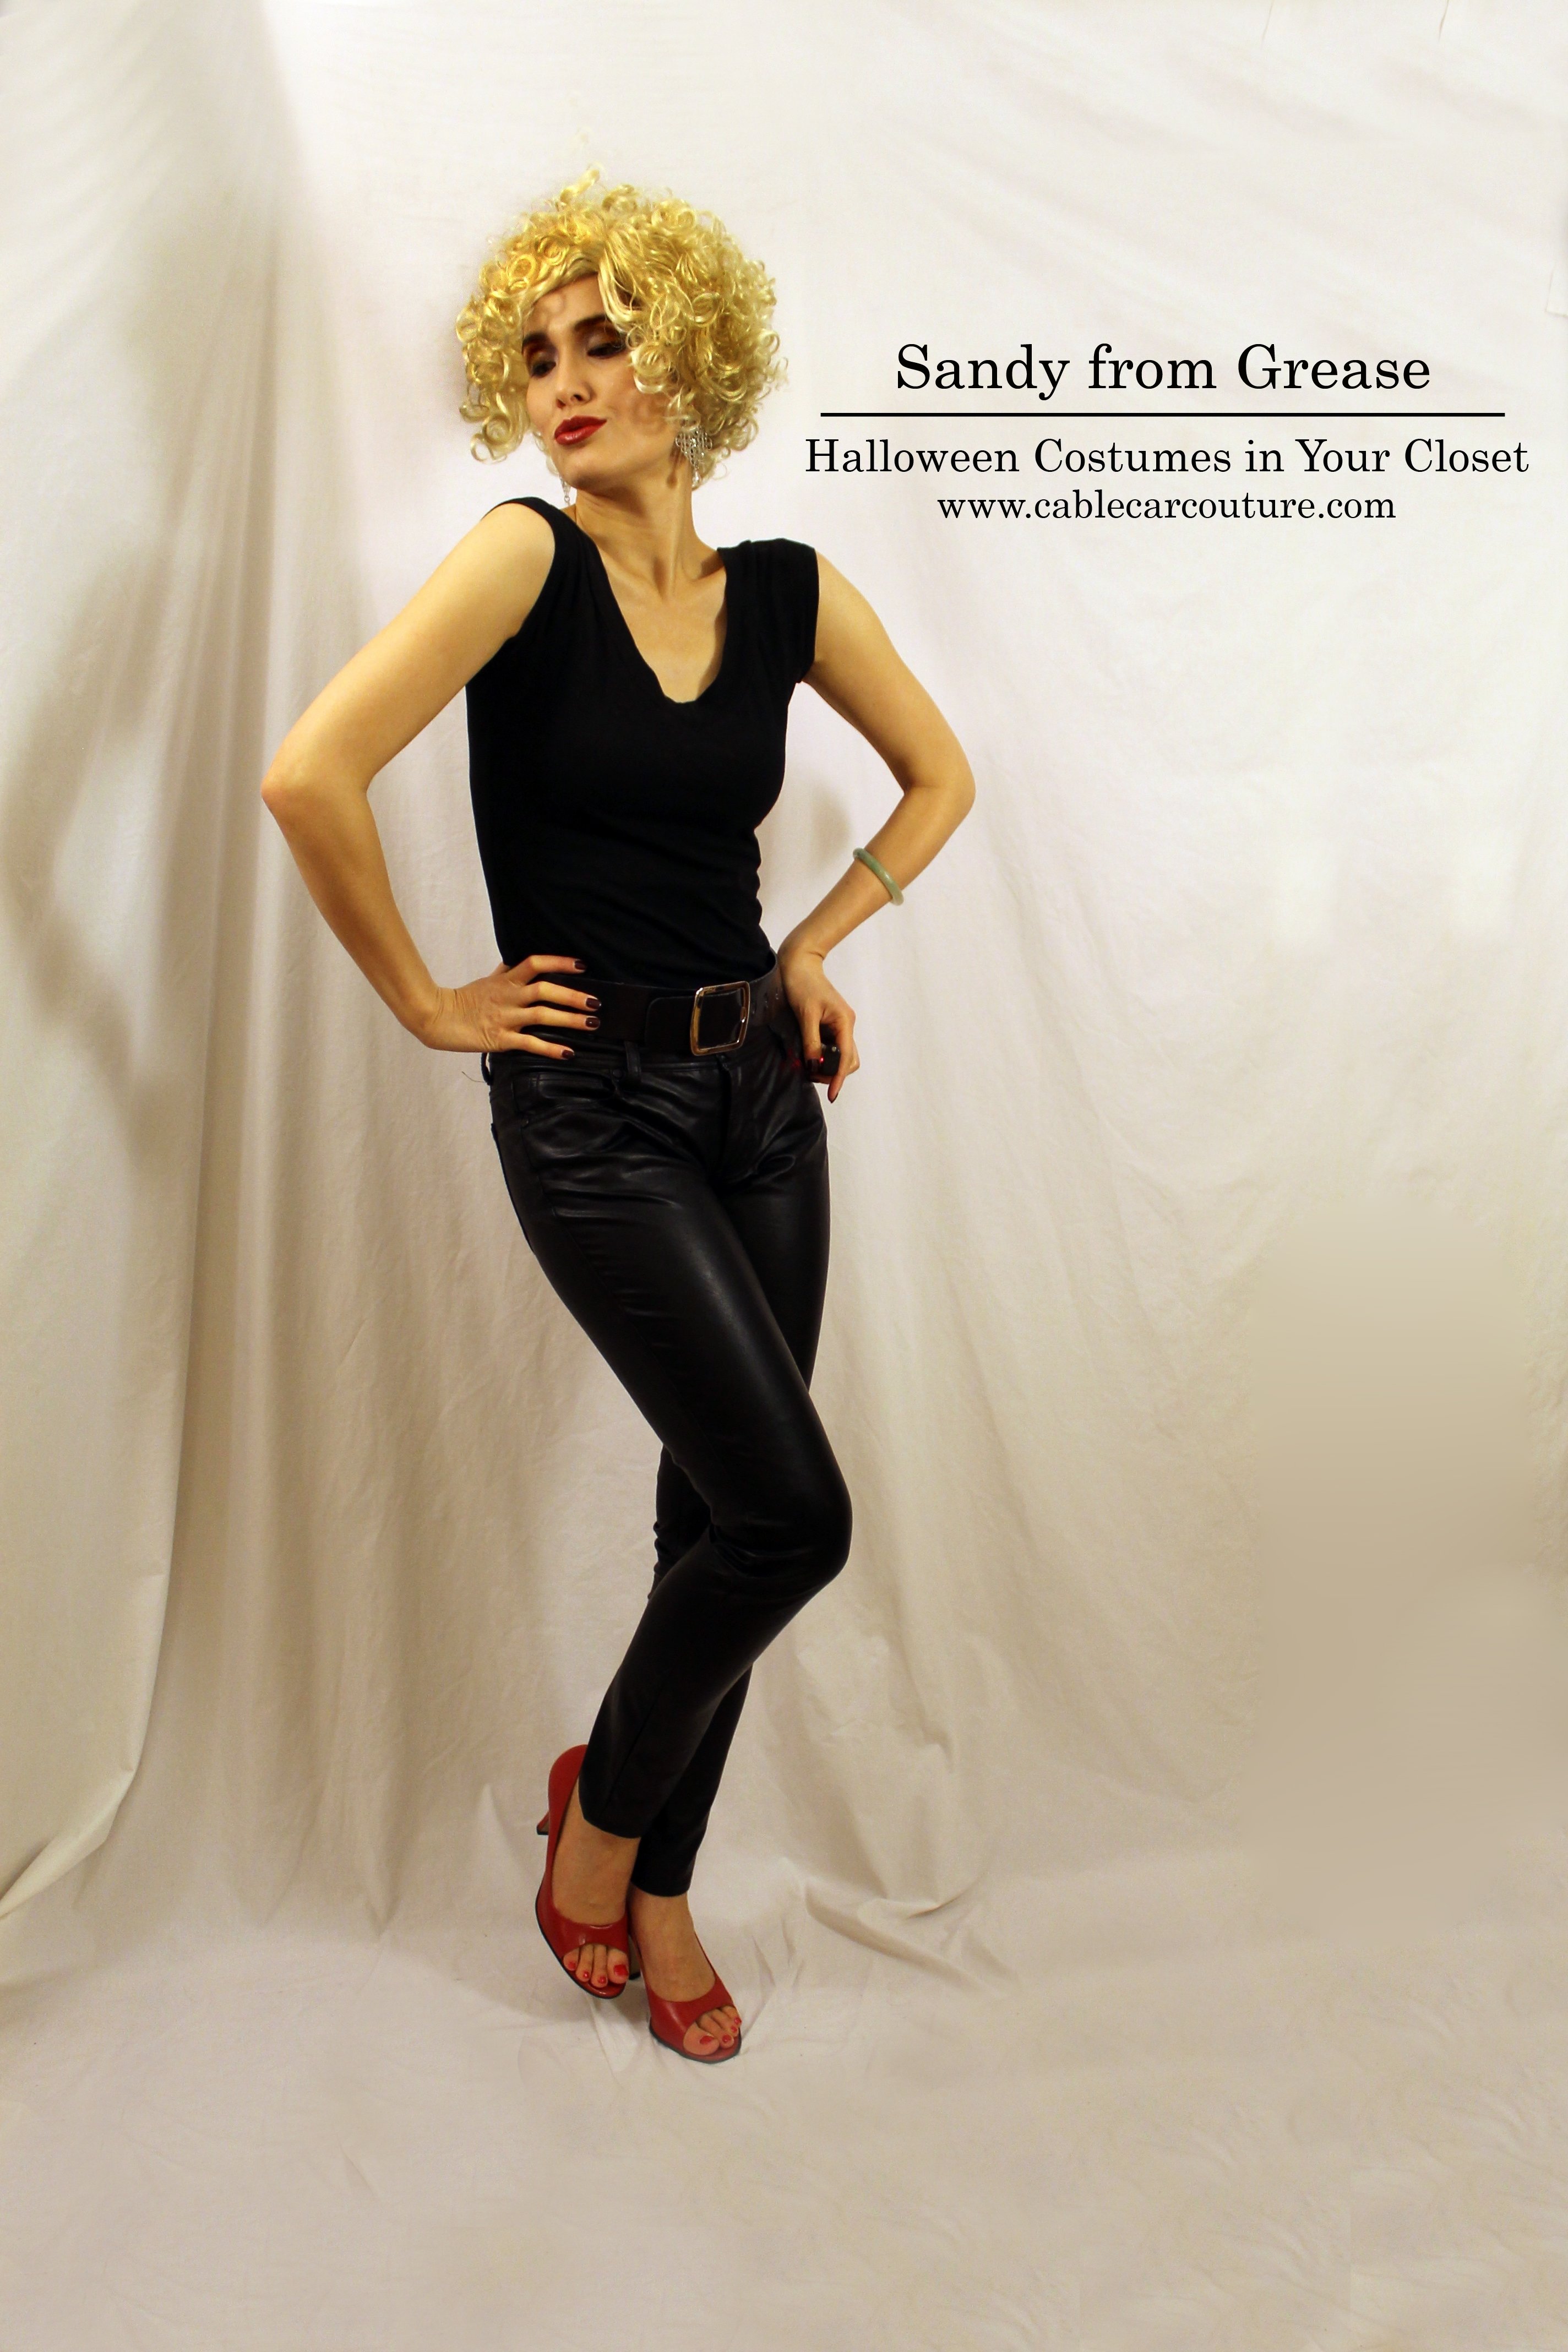 10 Great Halloween Costume Ideas For Blondes halloween costumes in your closet sandy from grease cable car couture 2022